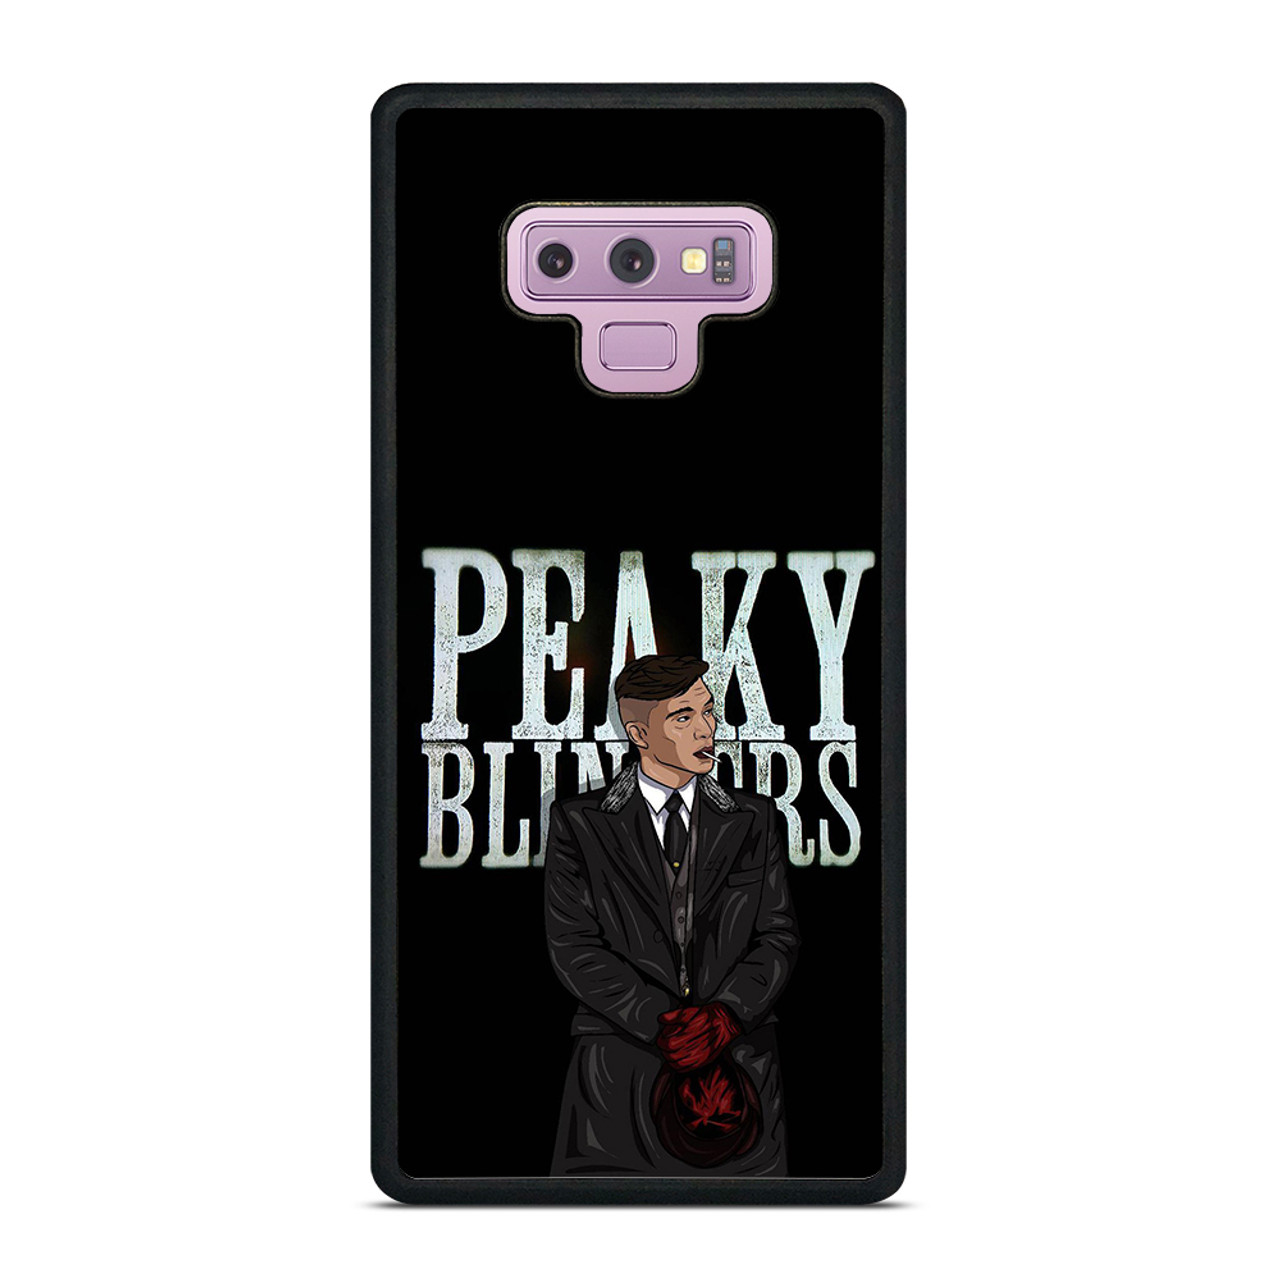 SHELBY PEAKY BLINDERS ART Samsung Galaxy Note 9 Case